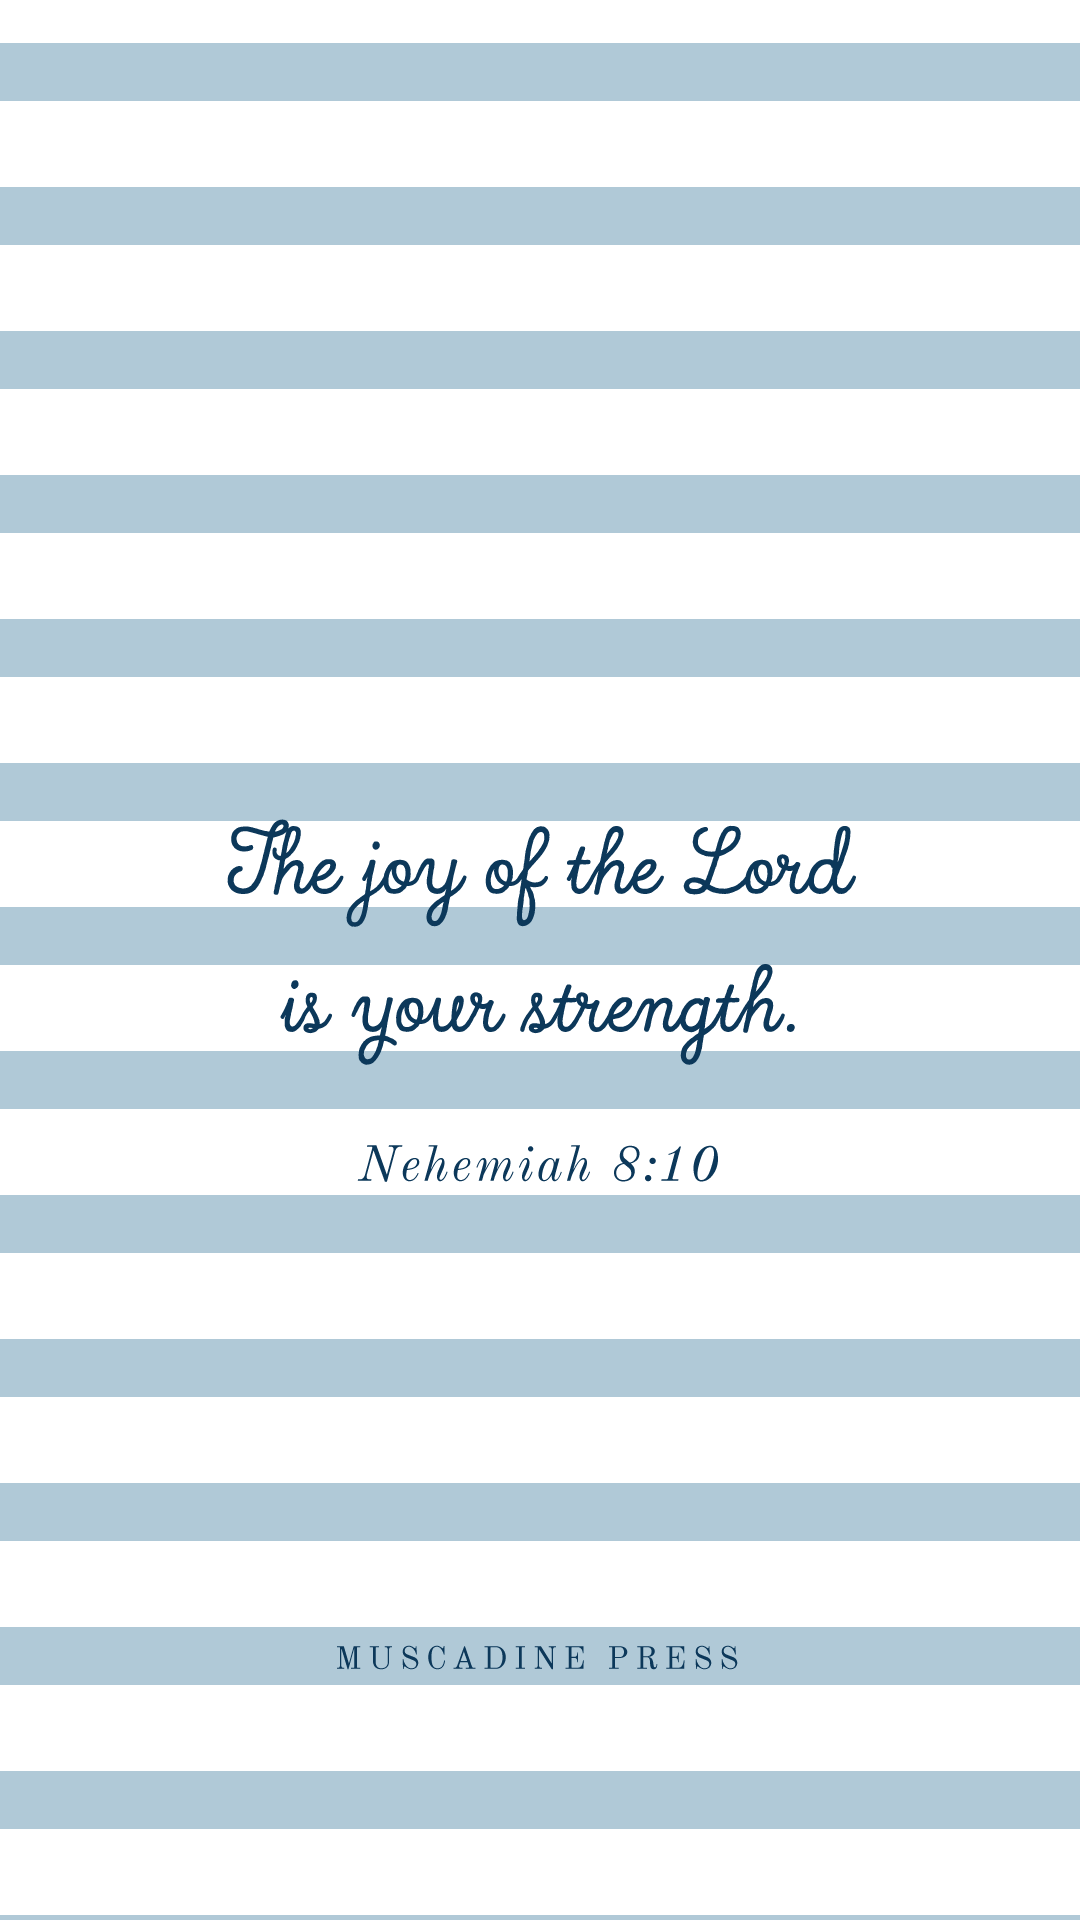 The joy of the Lord is your strength. Lock screen from Muscadine Press.